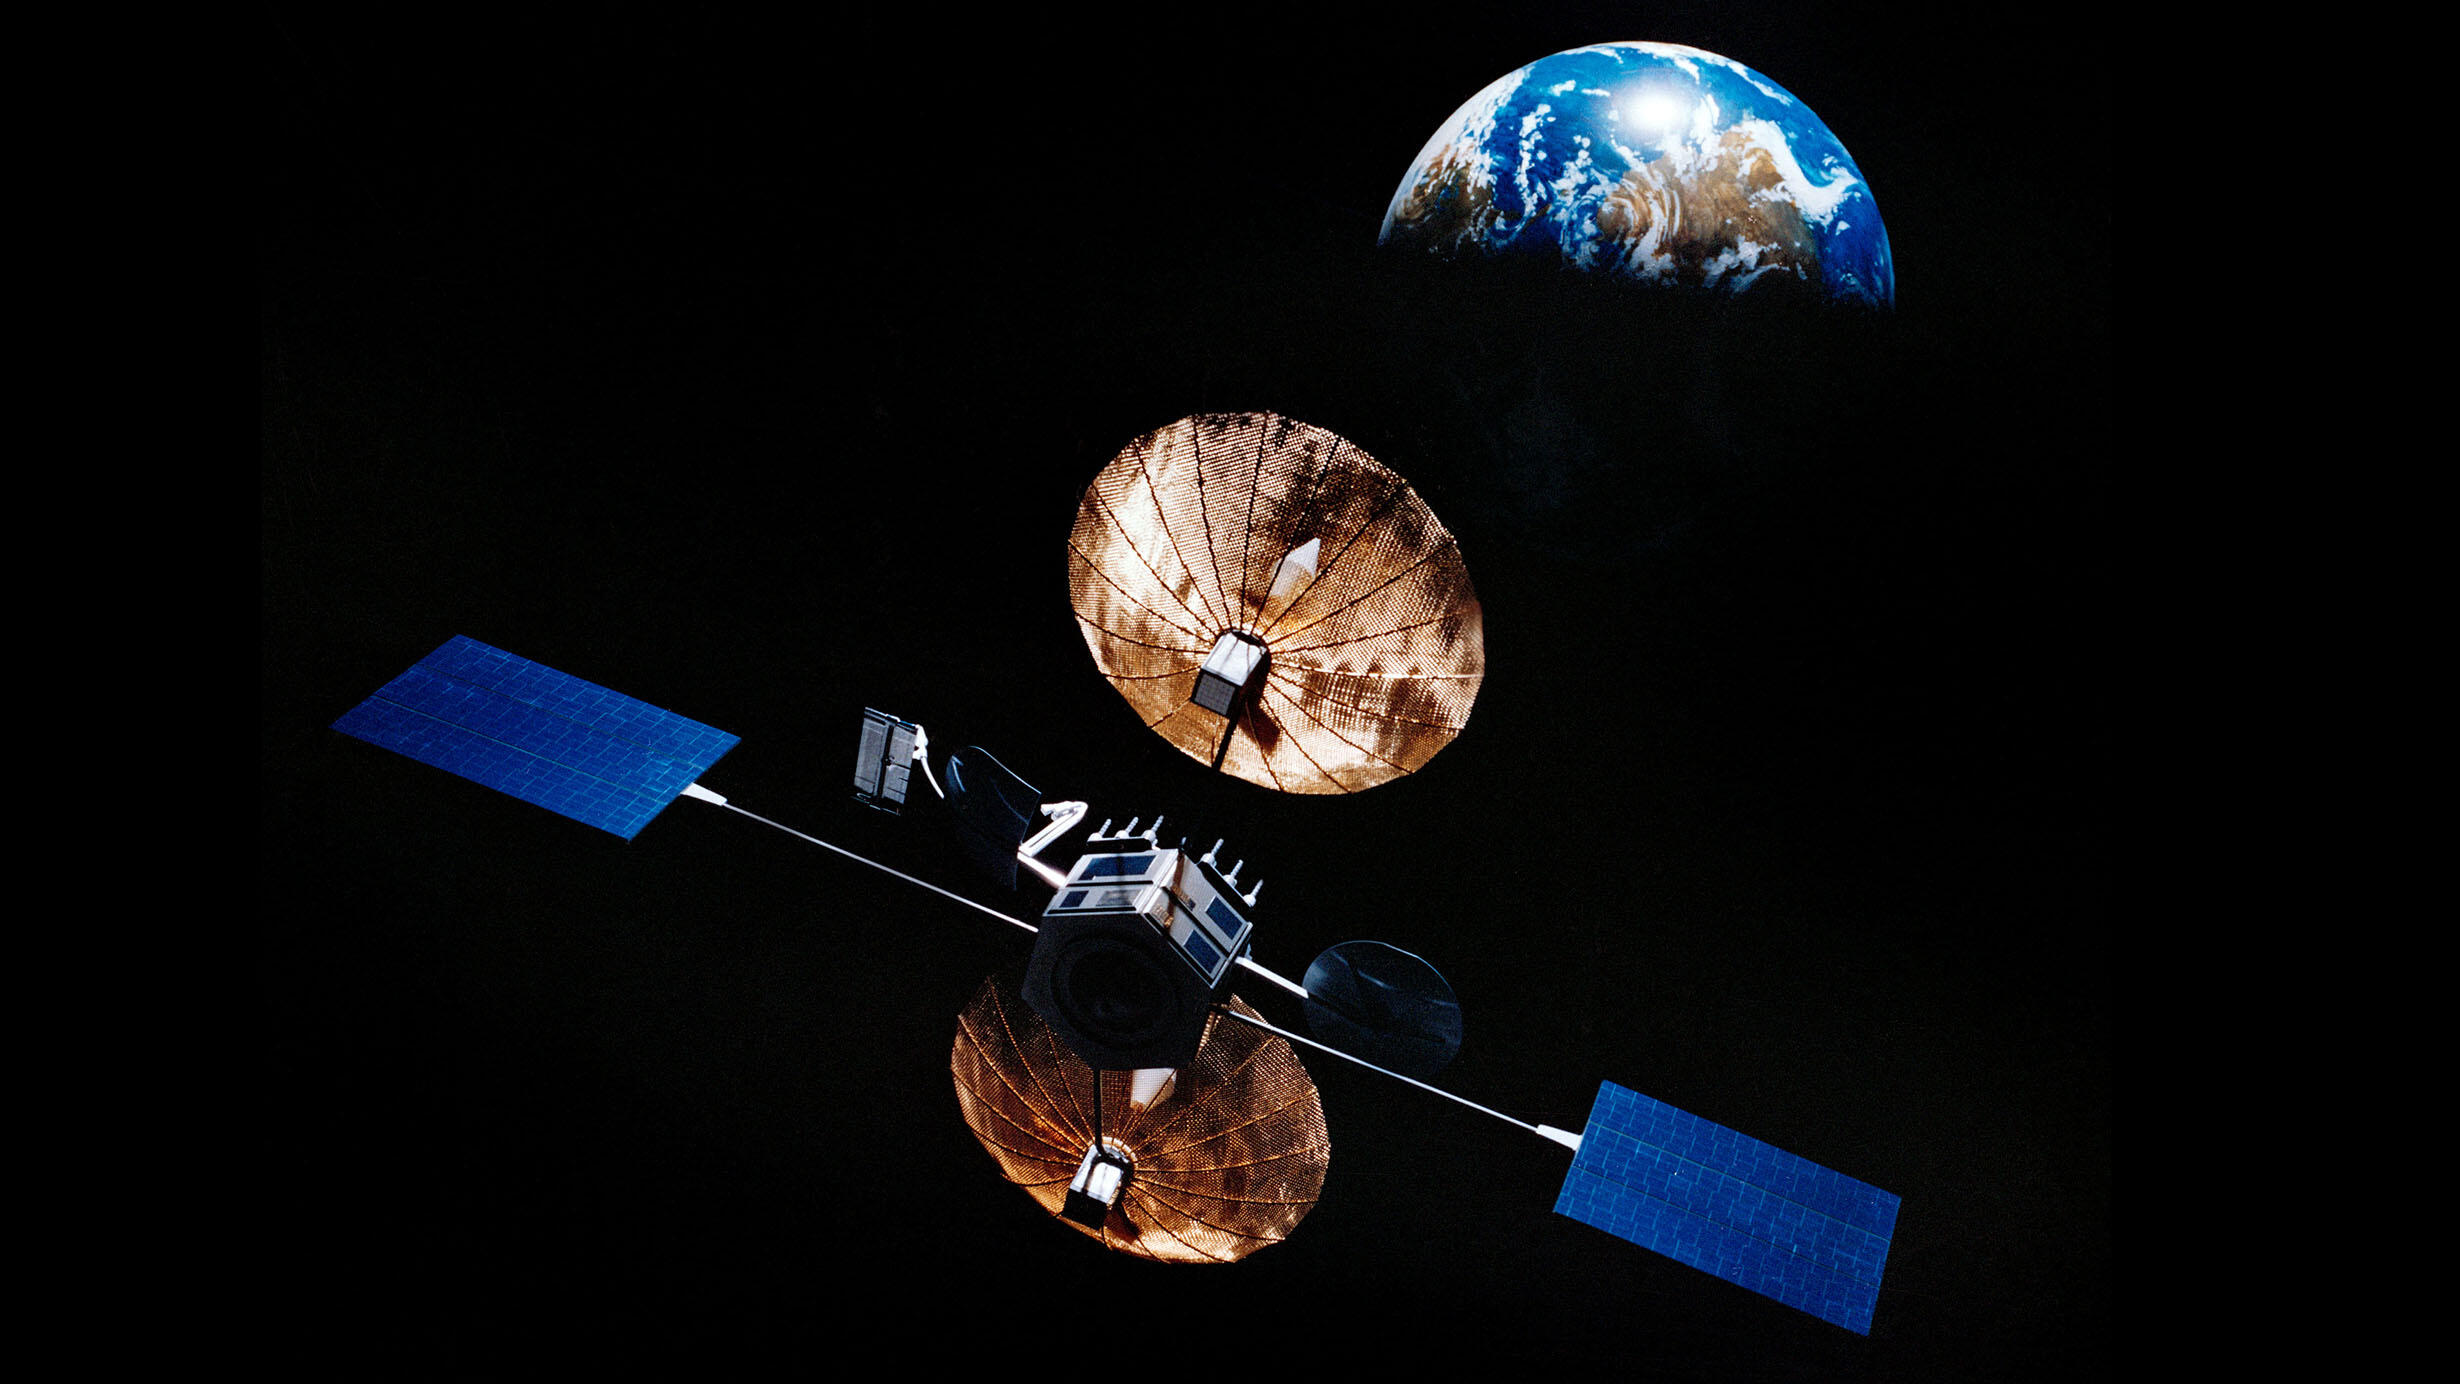 Rendering of a satellite in space, with Earth in view behind it.